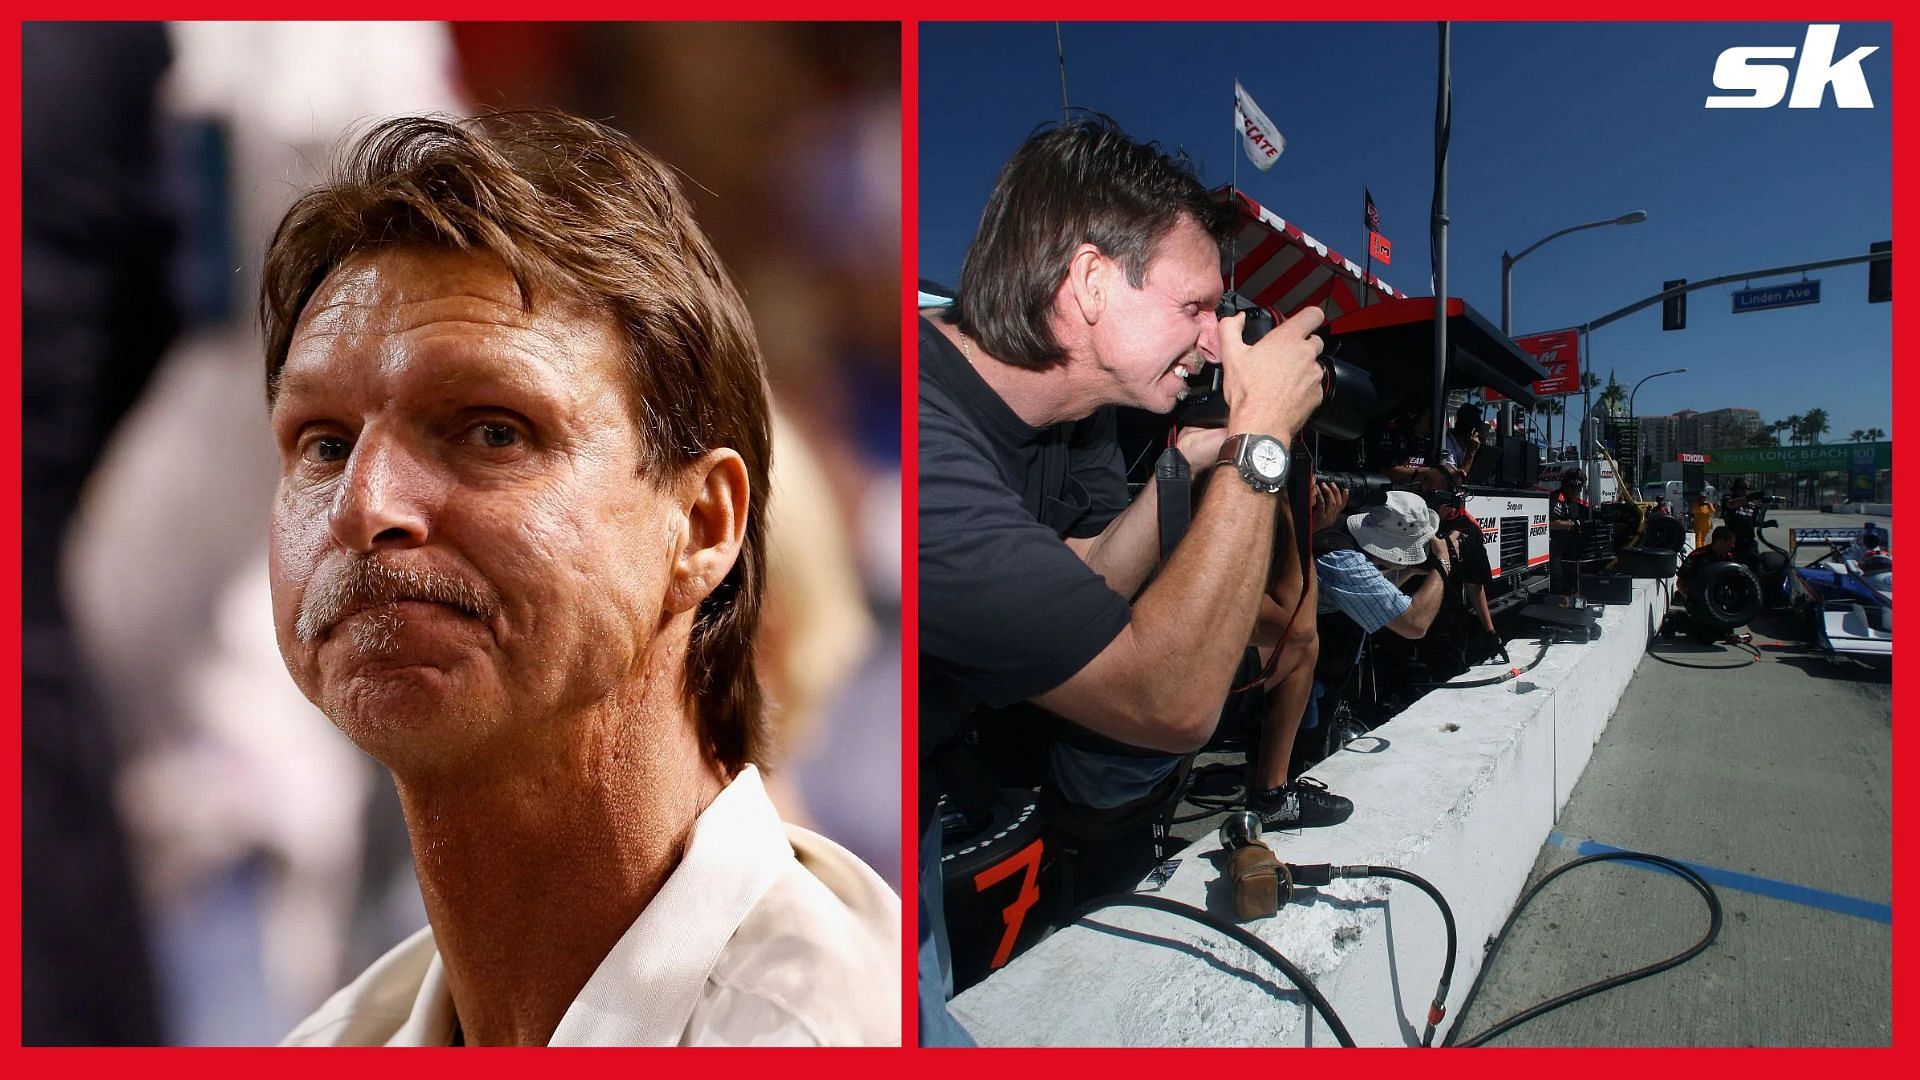 Hall of Famer Randy Johnson's love of photography back in the